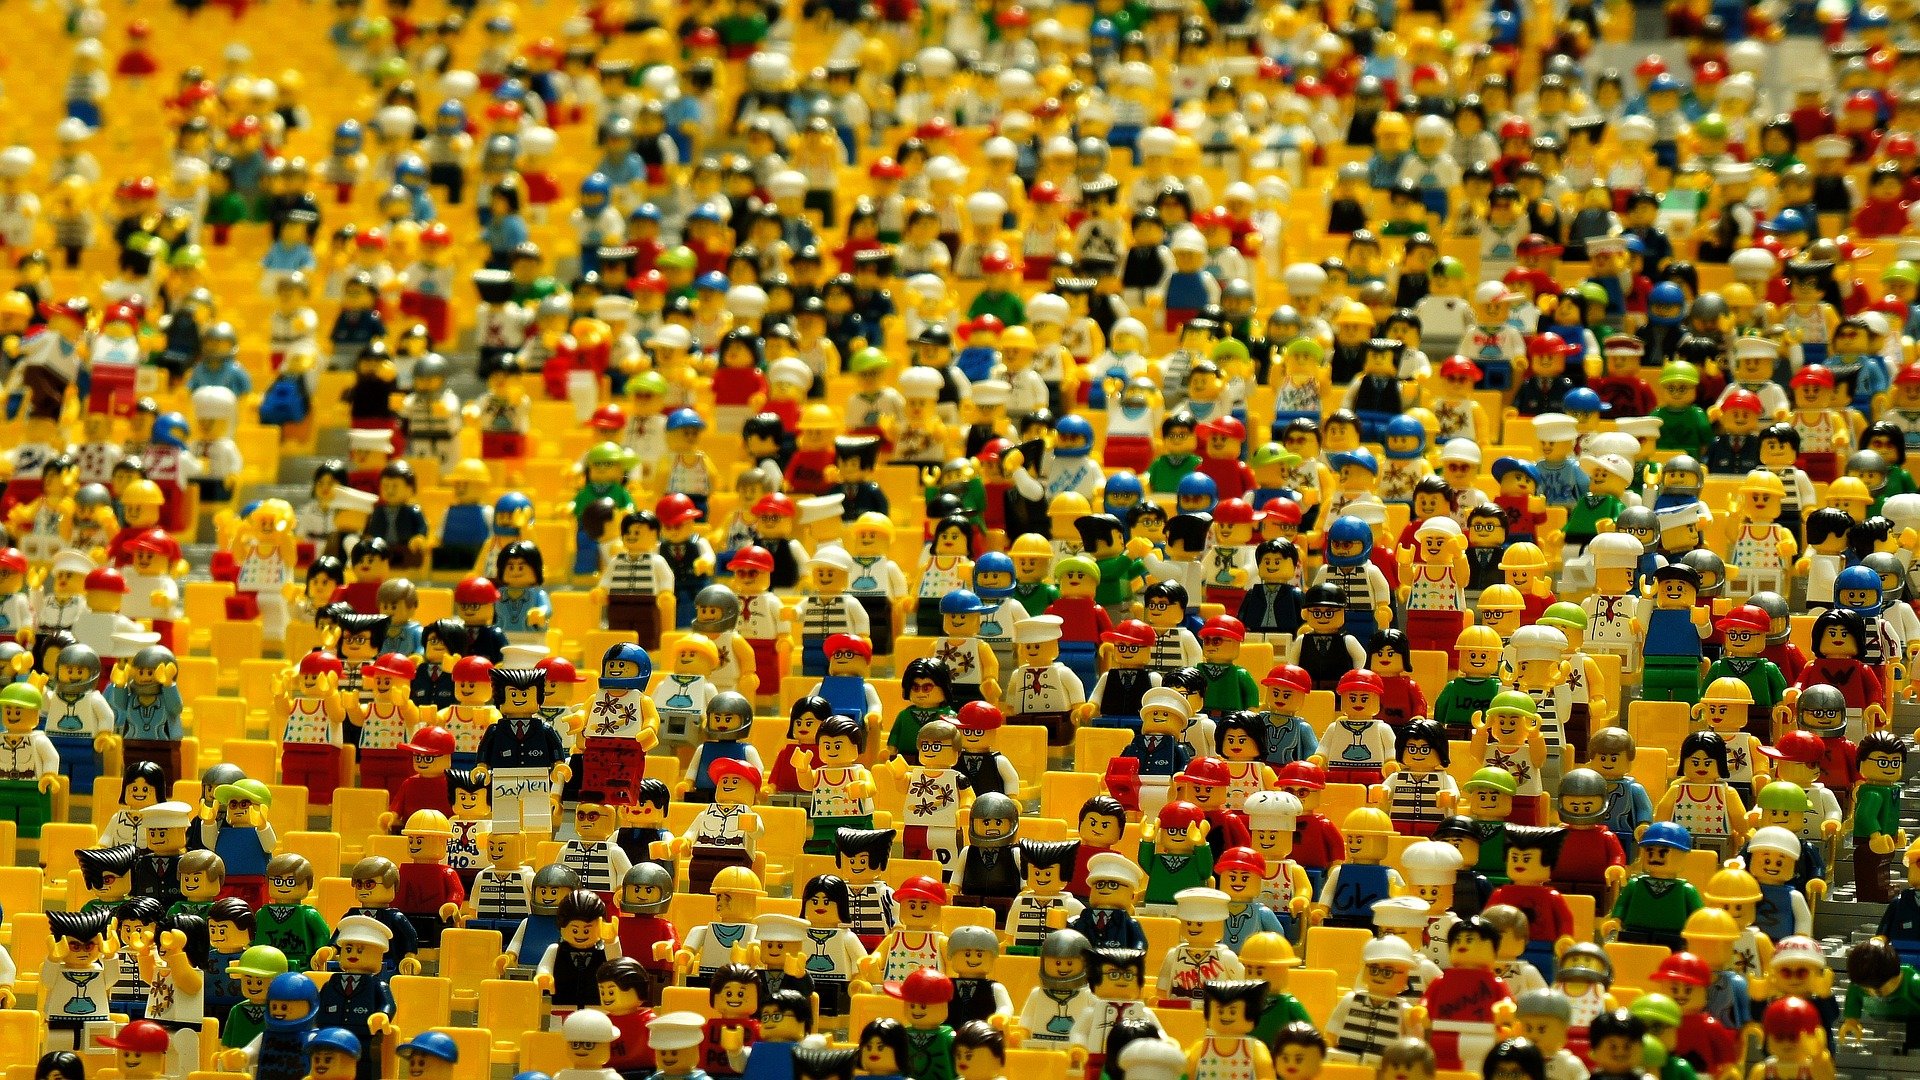 Crowds within crowd found to outperform 'wisdom of the crowd'